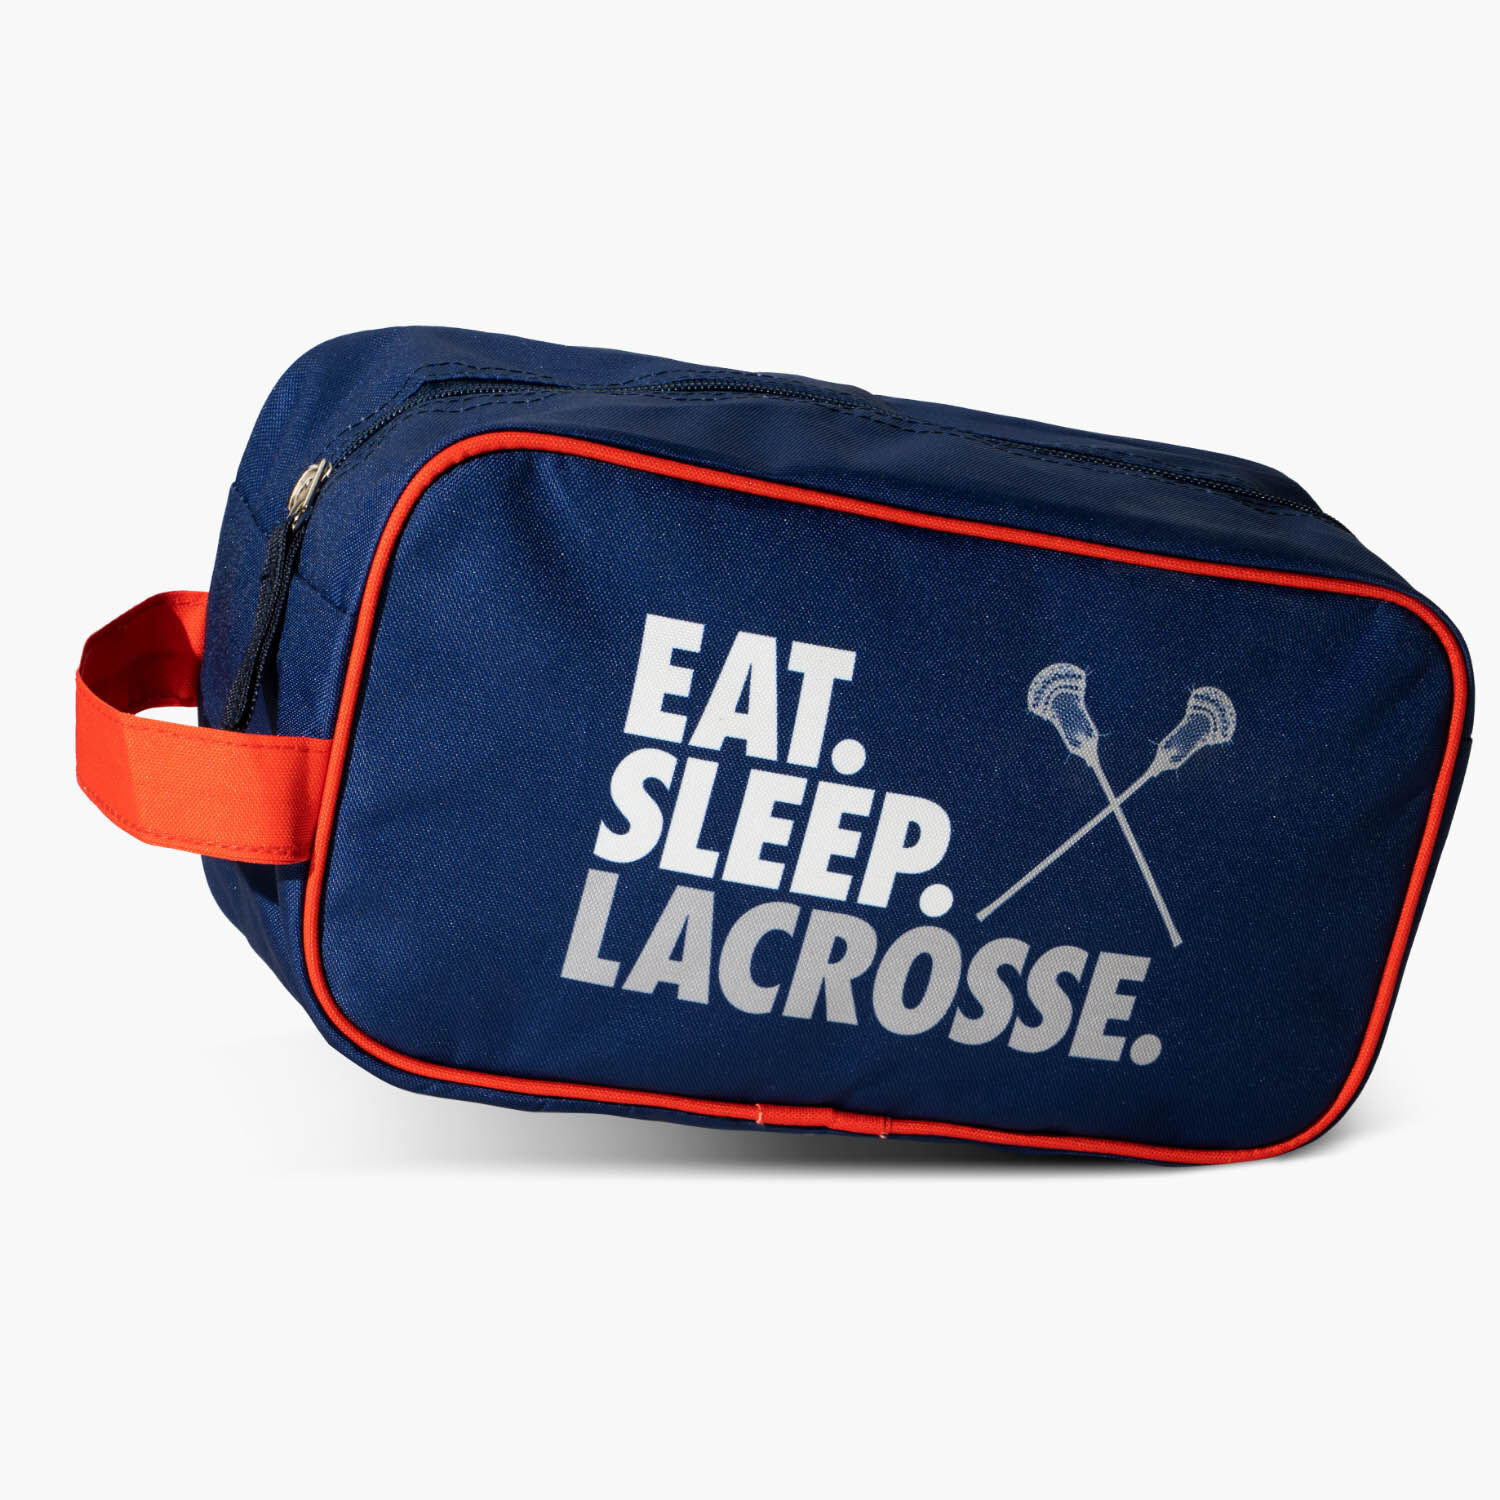 Warrior Black Hole Bag Lacrosse Bags | Free Shipping Over $75*